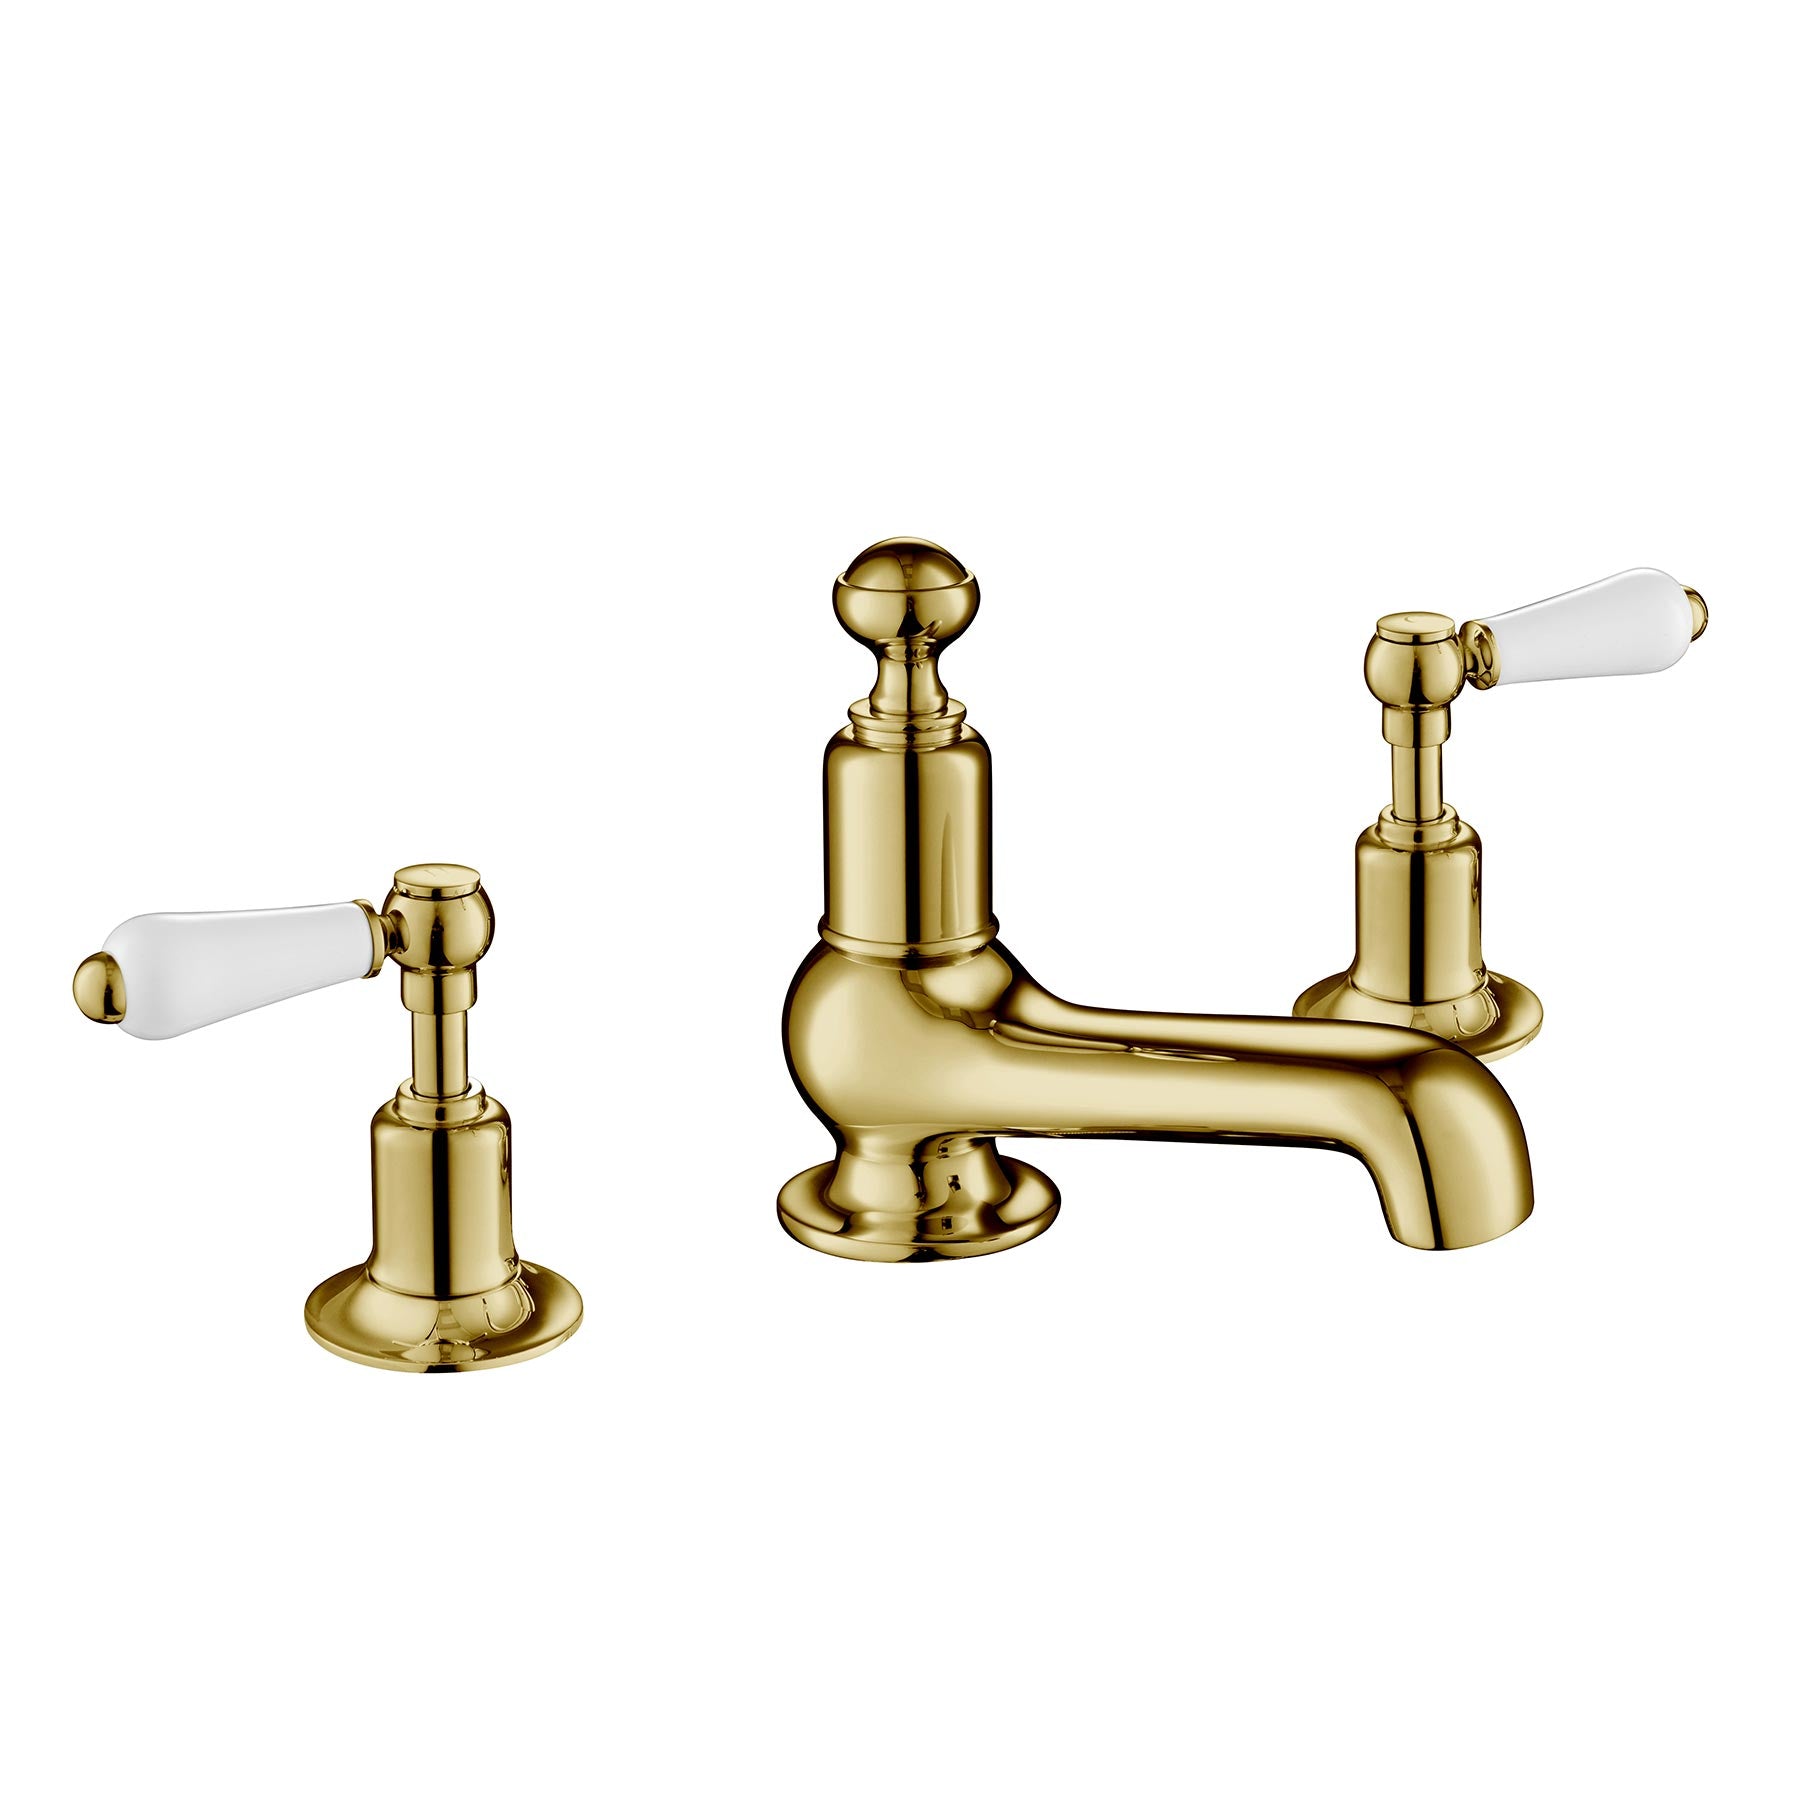 Chester Lever Gold-White 3 Hole Deck Mounted Gold Mixer Taps with an Aerated Victorian Basin Taps